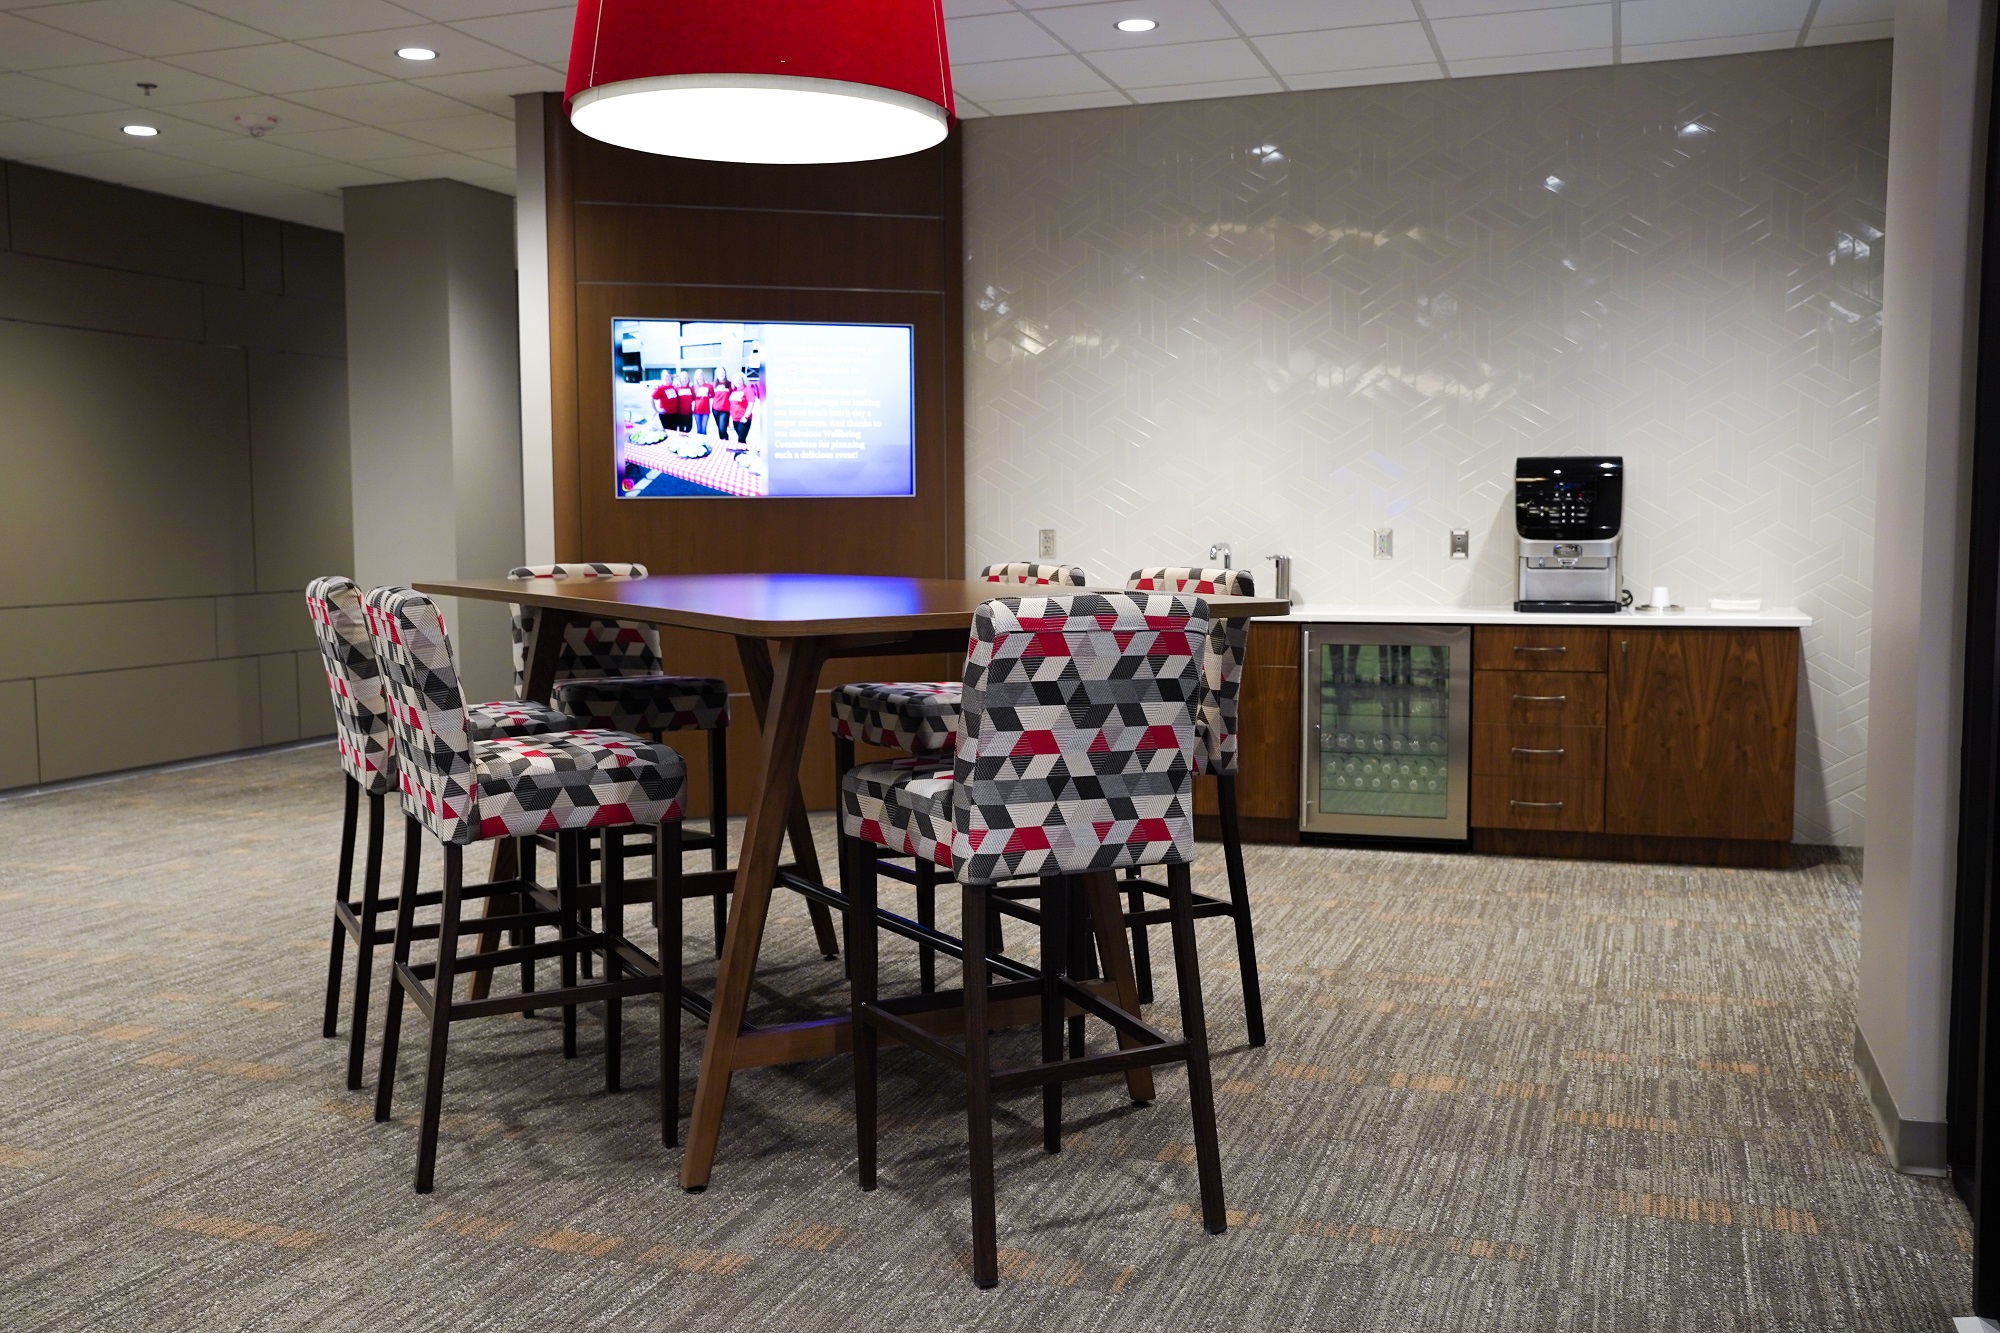 A high-rise table stands next to a beverage bar, welcoming customers into the new lobby.